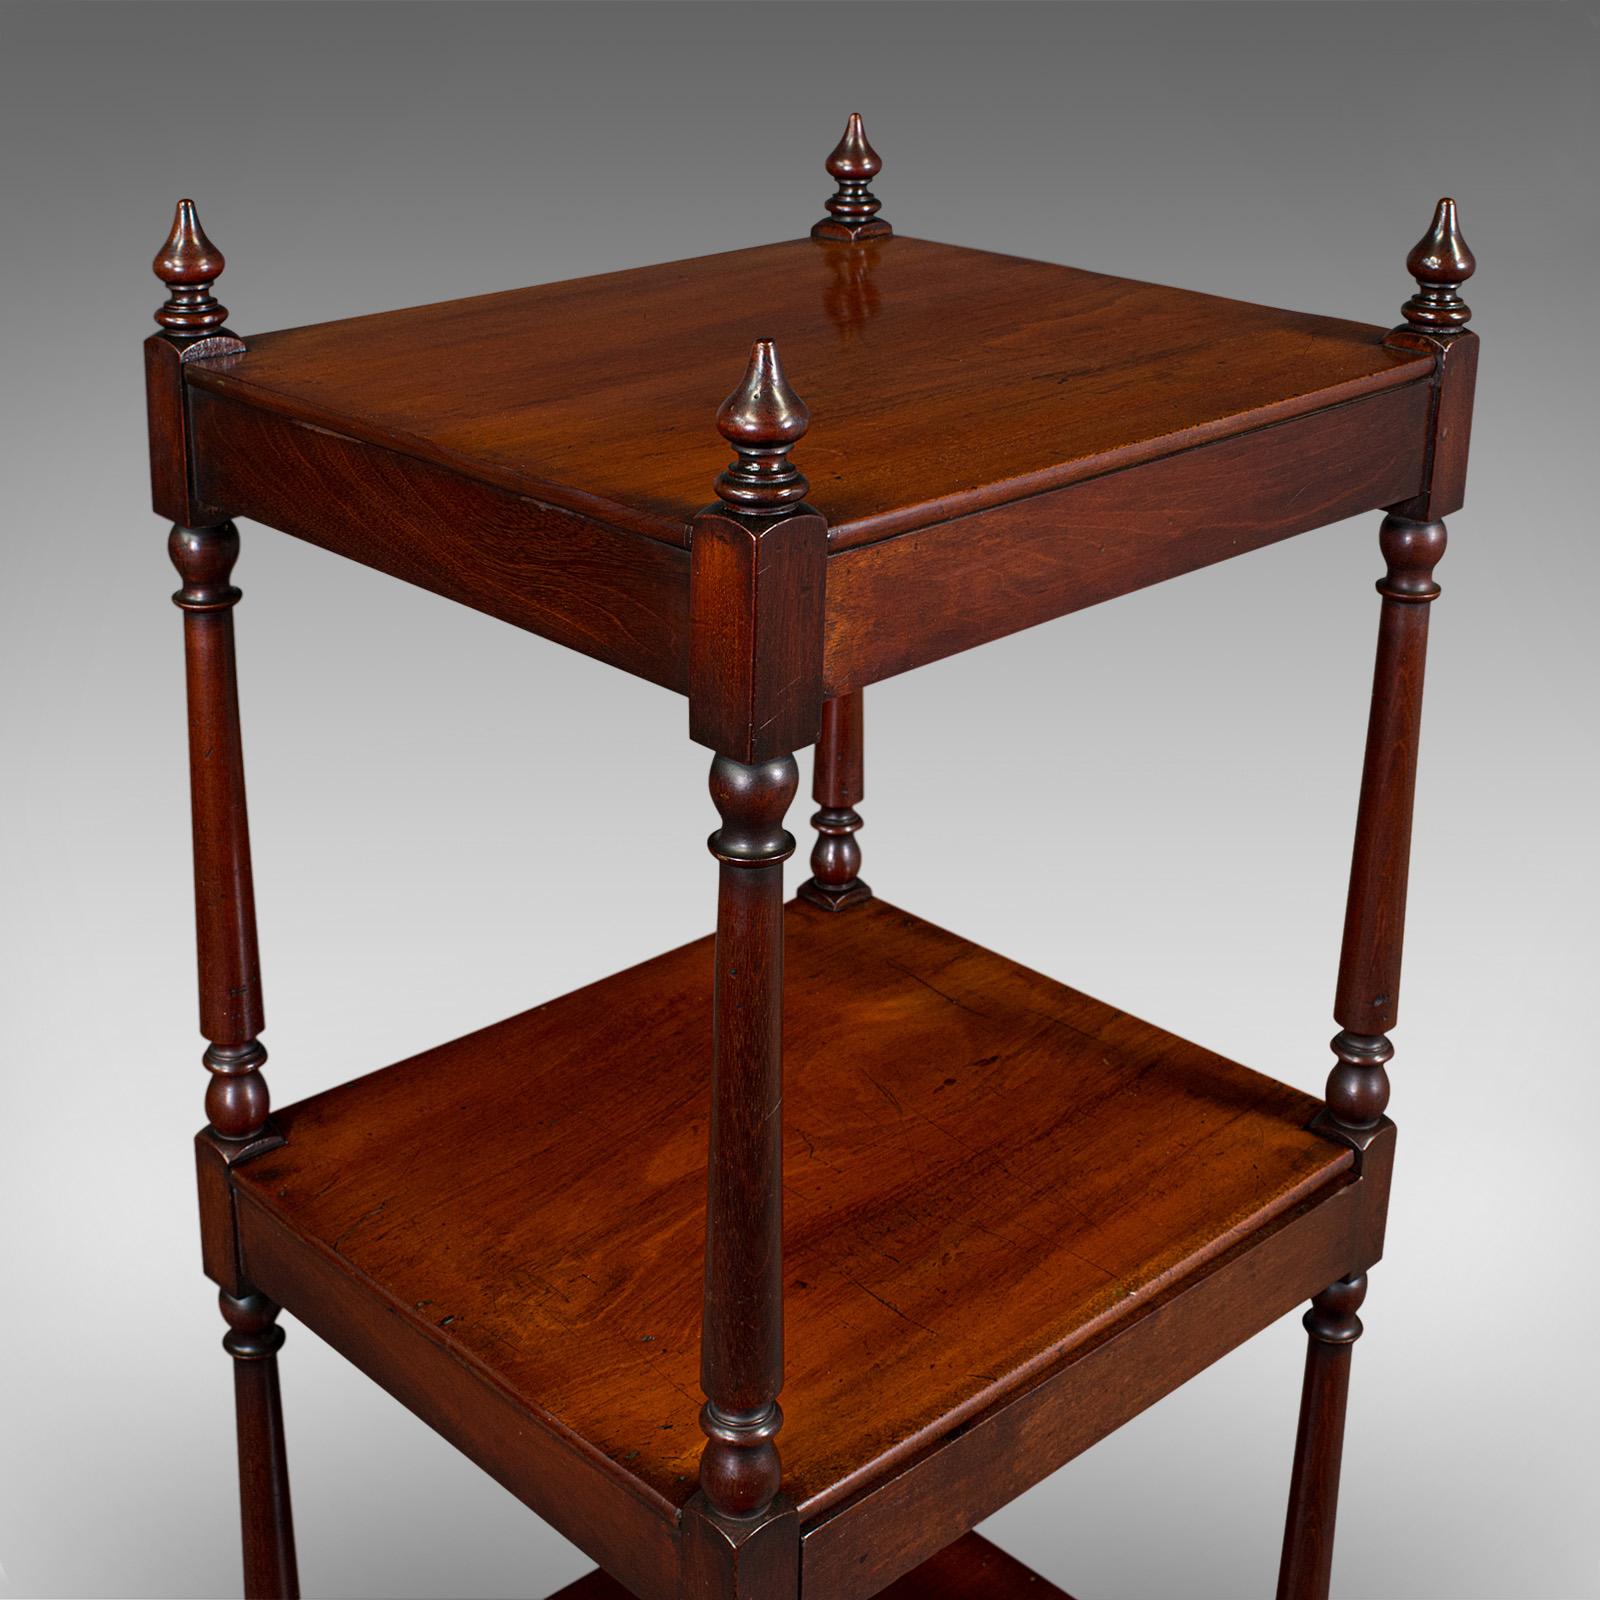 Wood Antique Display Whatnot, English, 4 Tier, Ornament Stand, Regency, Circa 1820